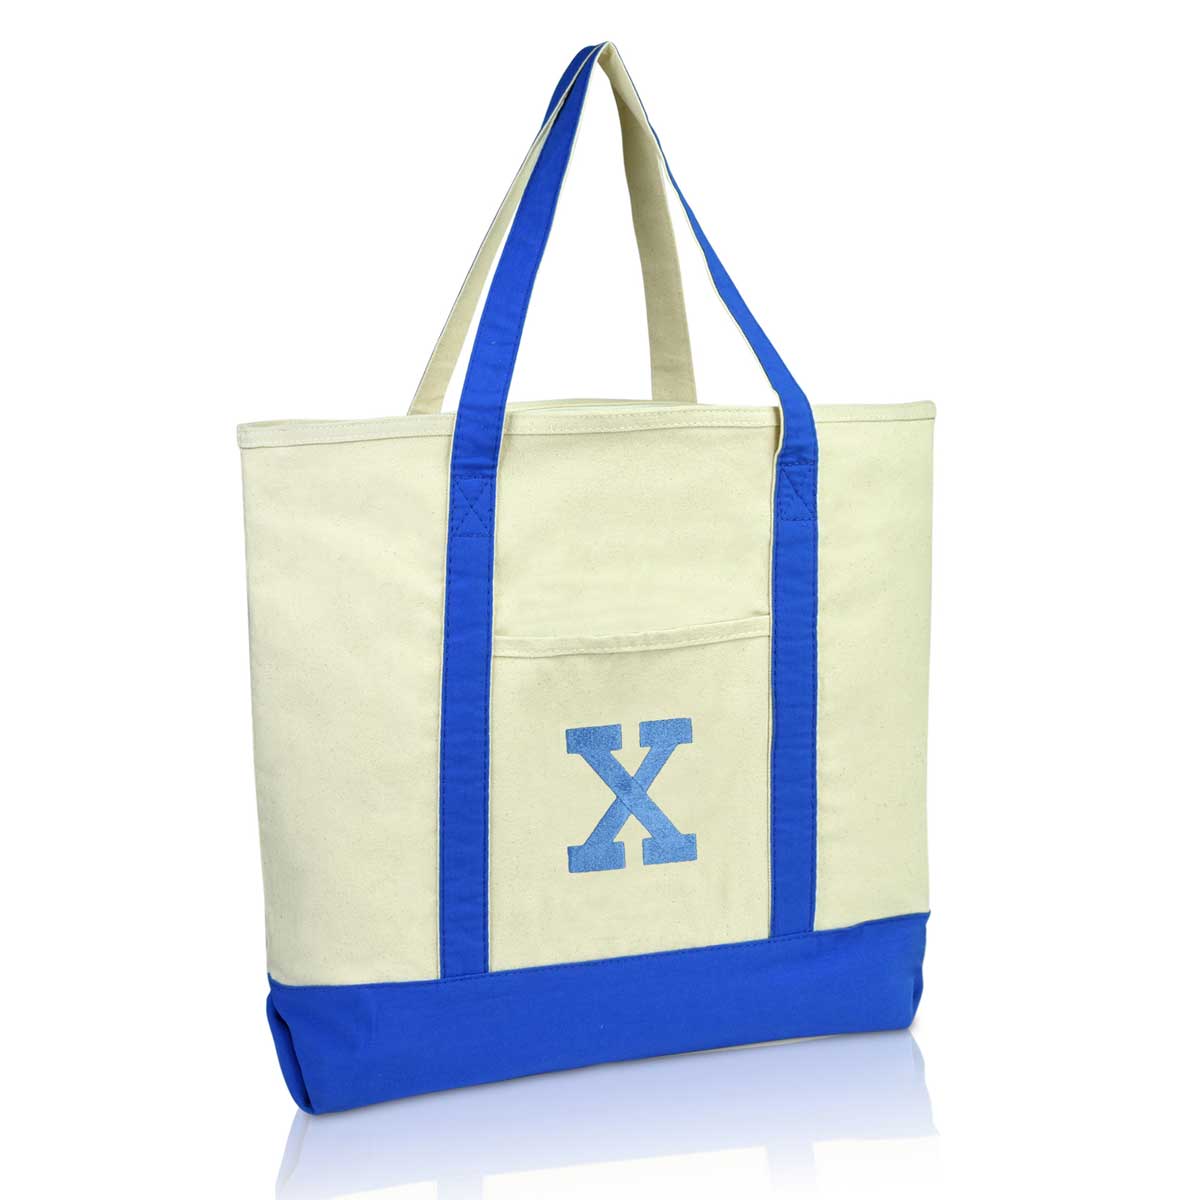 Dalix Initial Tote Bag Personalized Monogram Zippered Top Letter - X